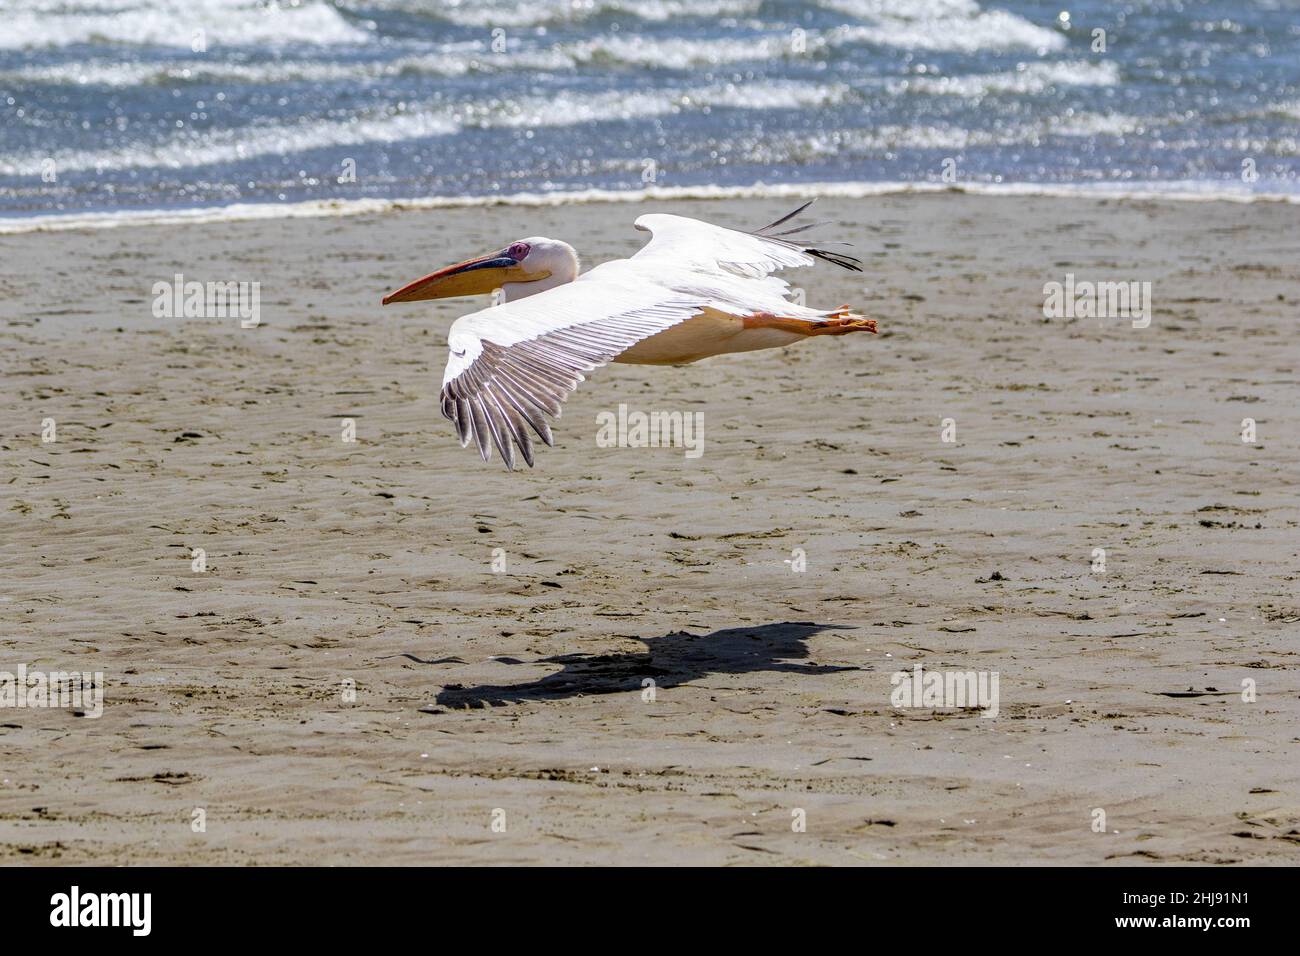 Grand Pelican blanc, Walvis Bay, Namibie Banque D'Images